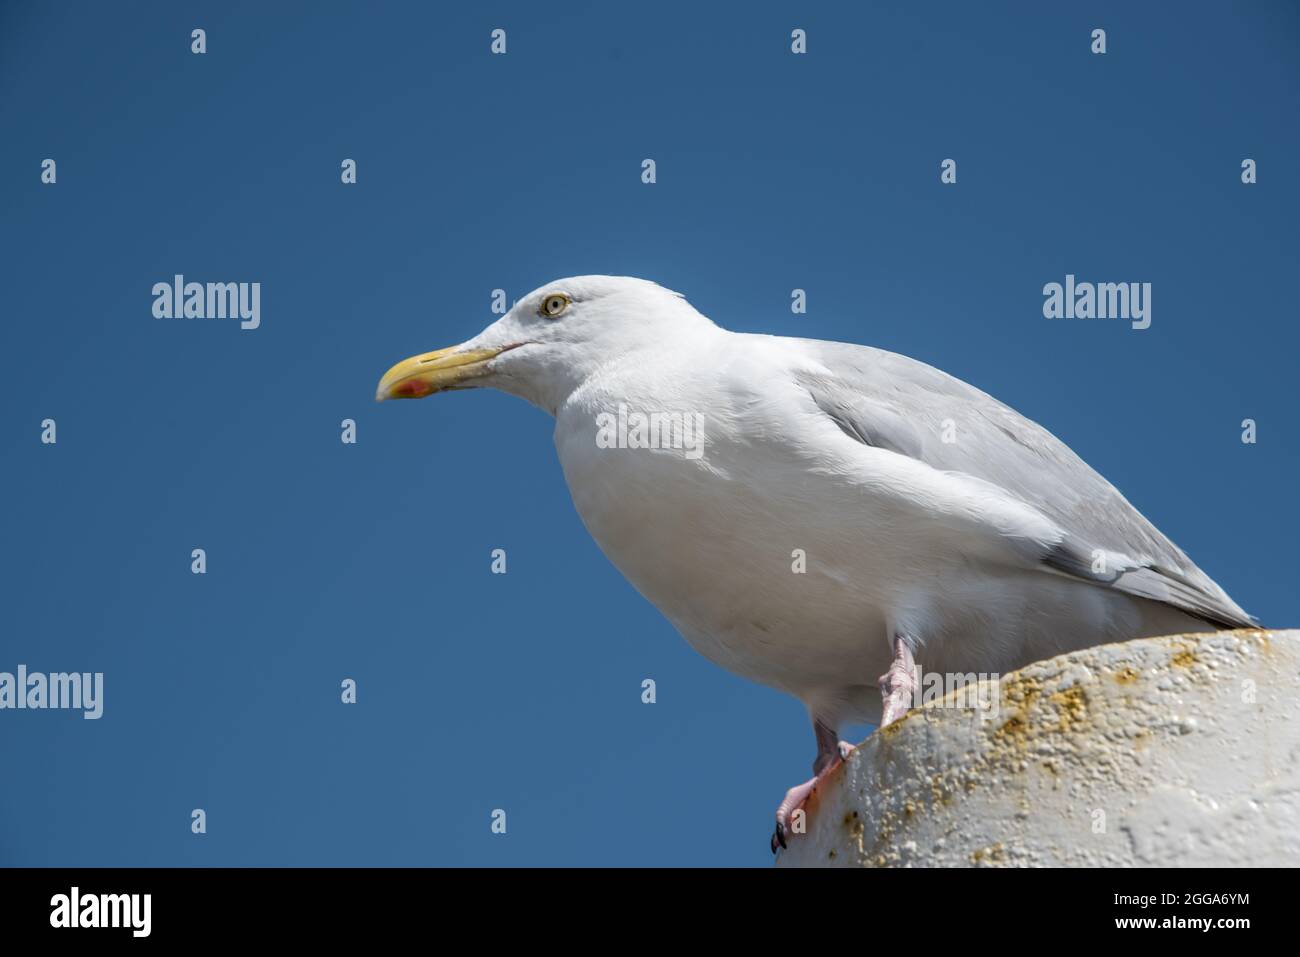 Texel, the Netherlands. August 13, 2021.Screaming seagull on a mooring post. High quality photo Stock Photo